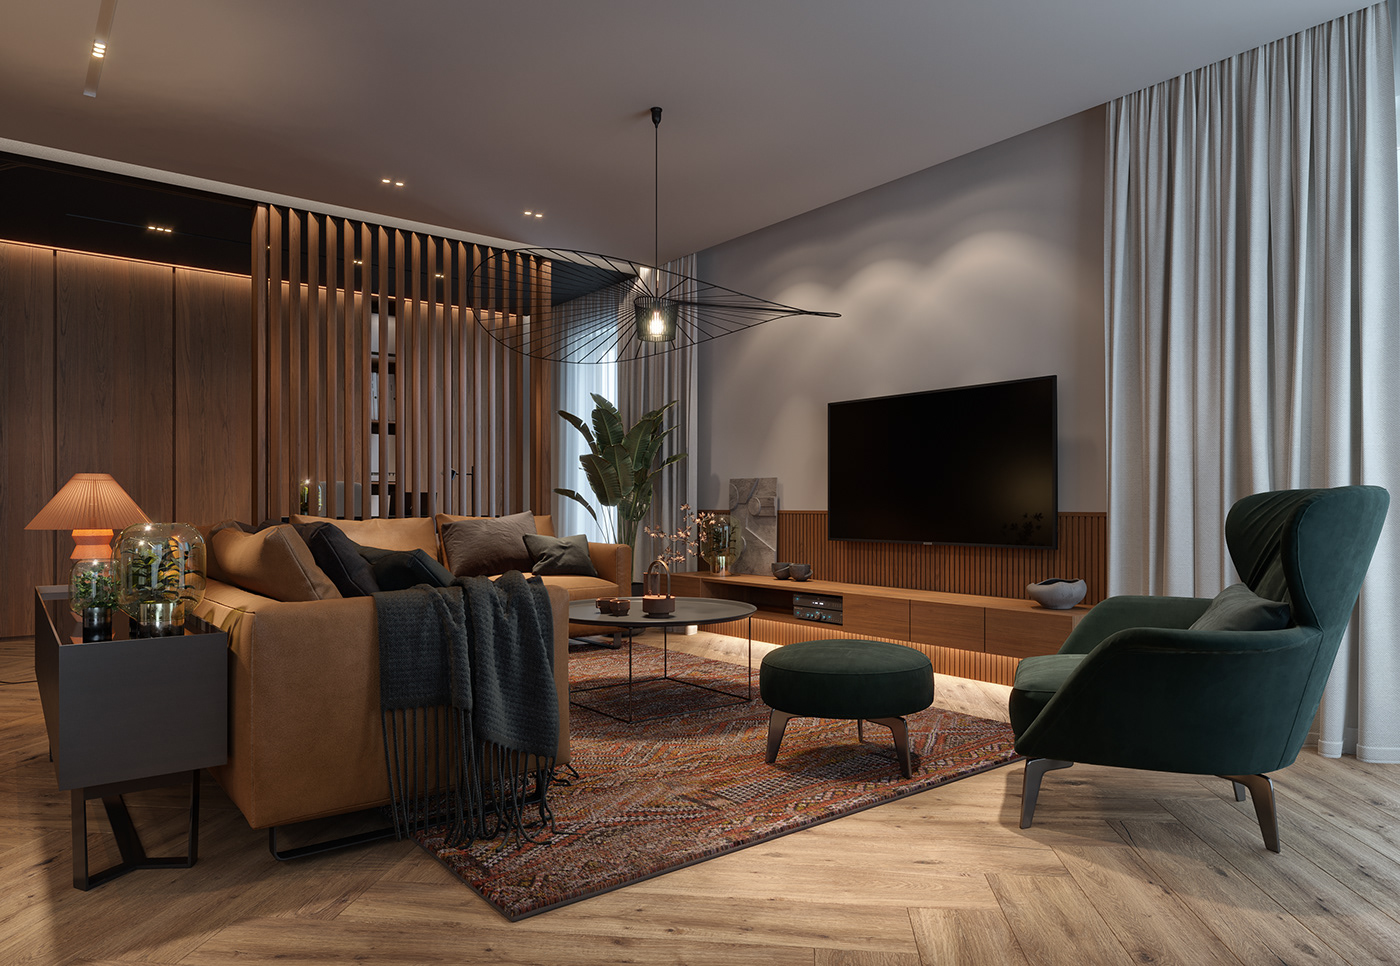 3D Visualization 3ds max corona render  green interiors interior design  Interior Visualization light interior modern interior design wooden interiors home office